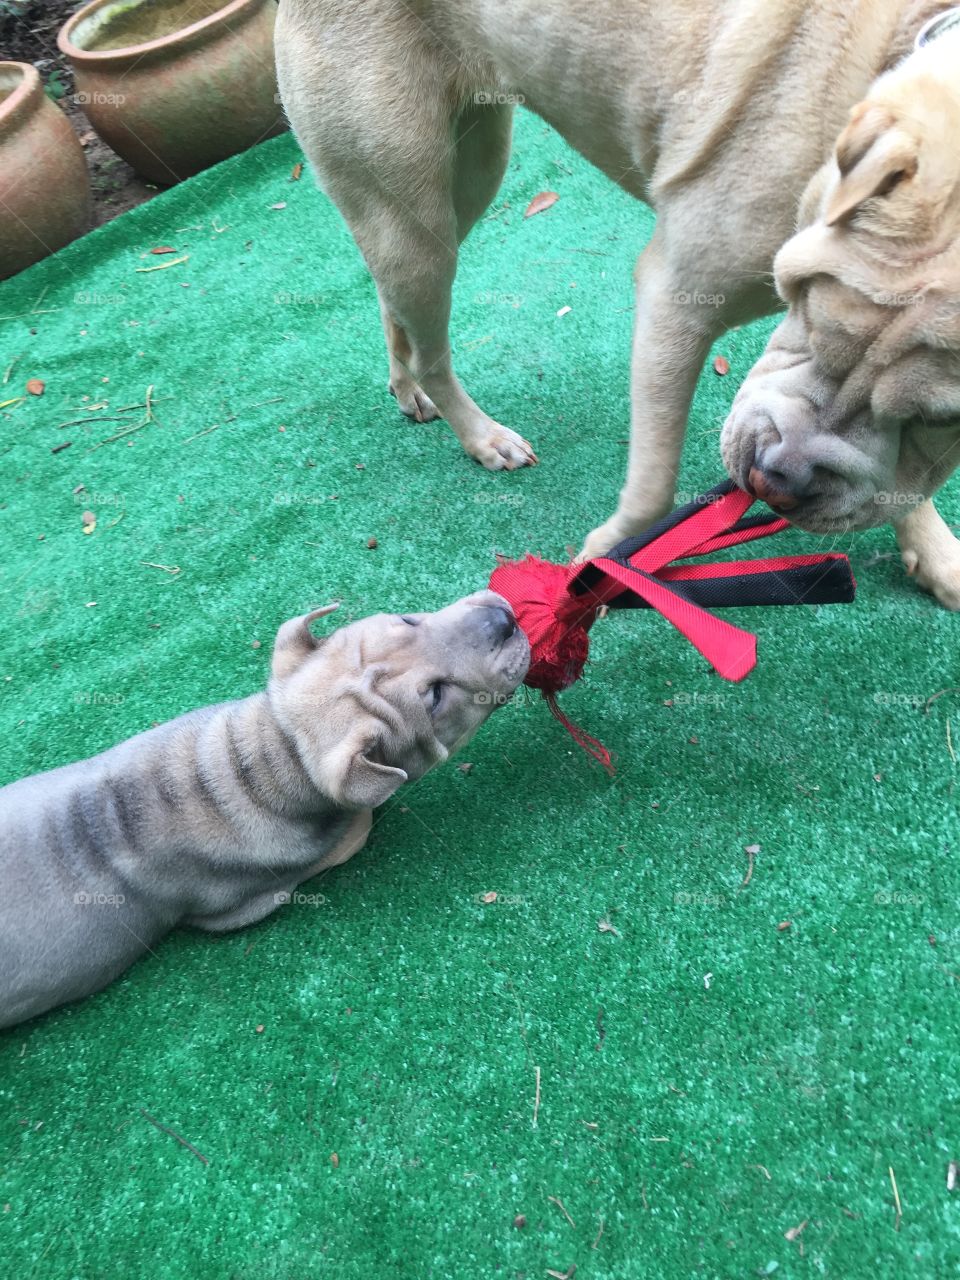 Two shar-peis play tug-of-war with a Kong toy.